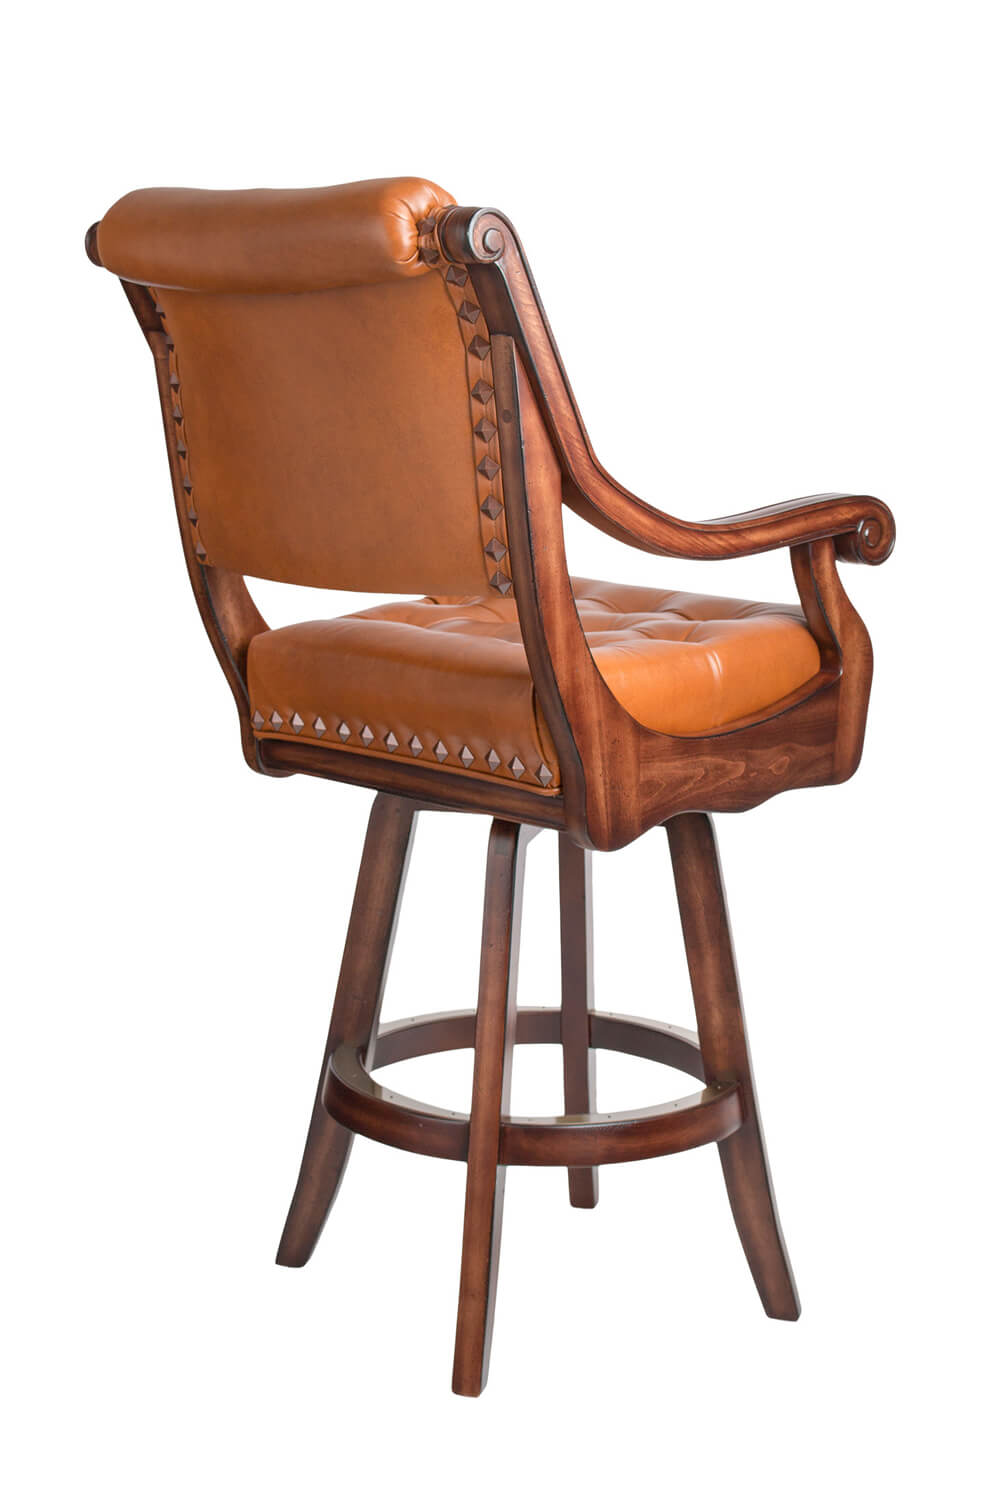 Ponce De Leon Wood Arm Swivel Stool, Pineapple Back Bar Stools With Arms